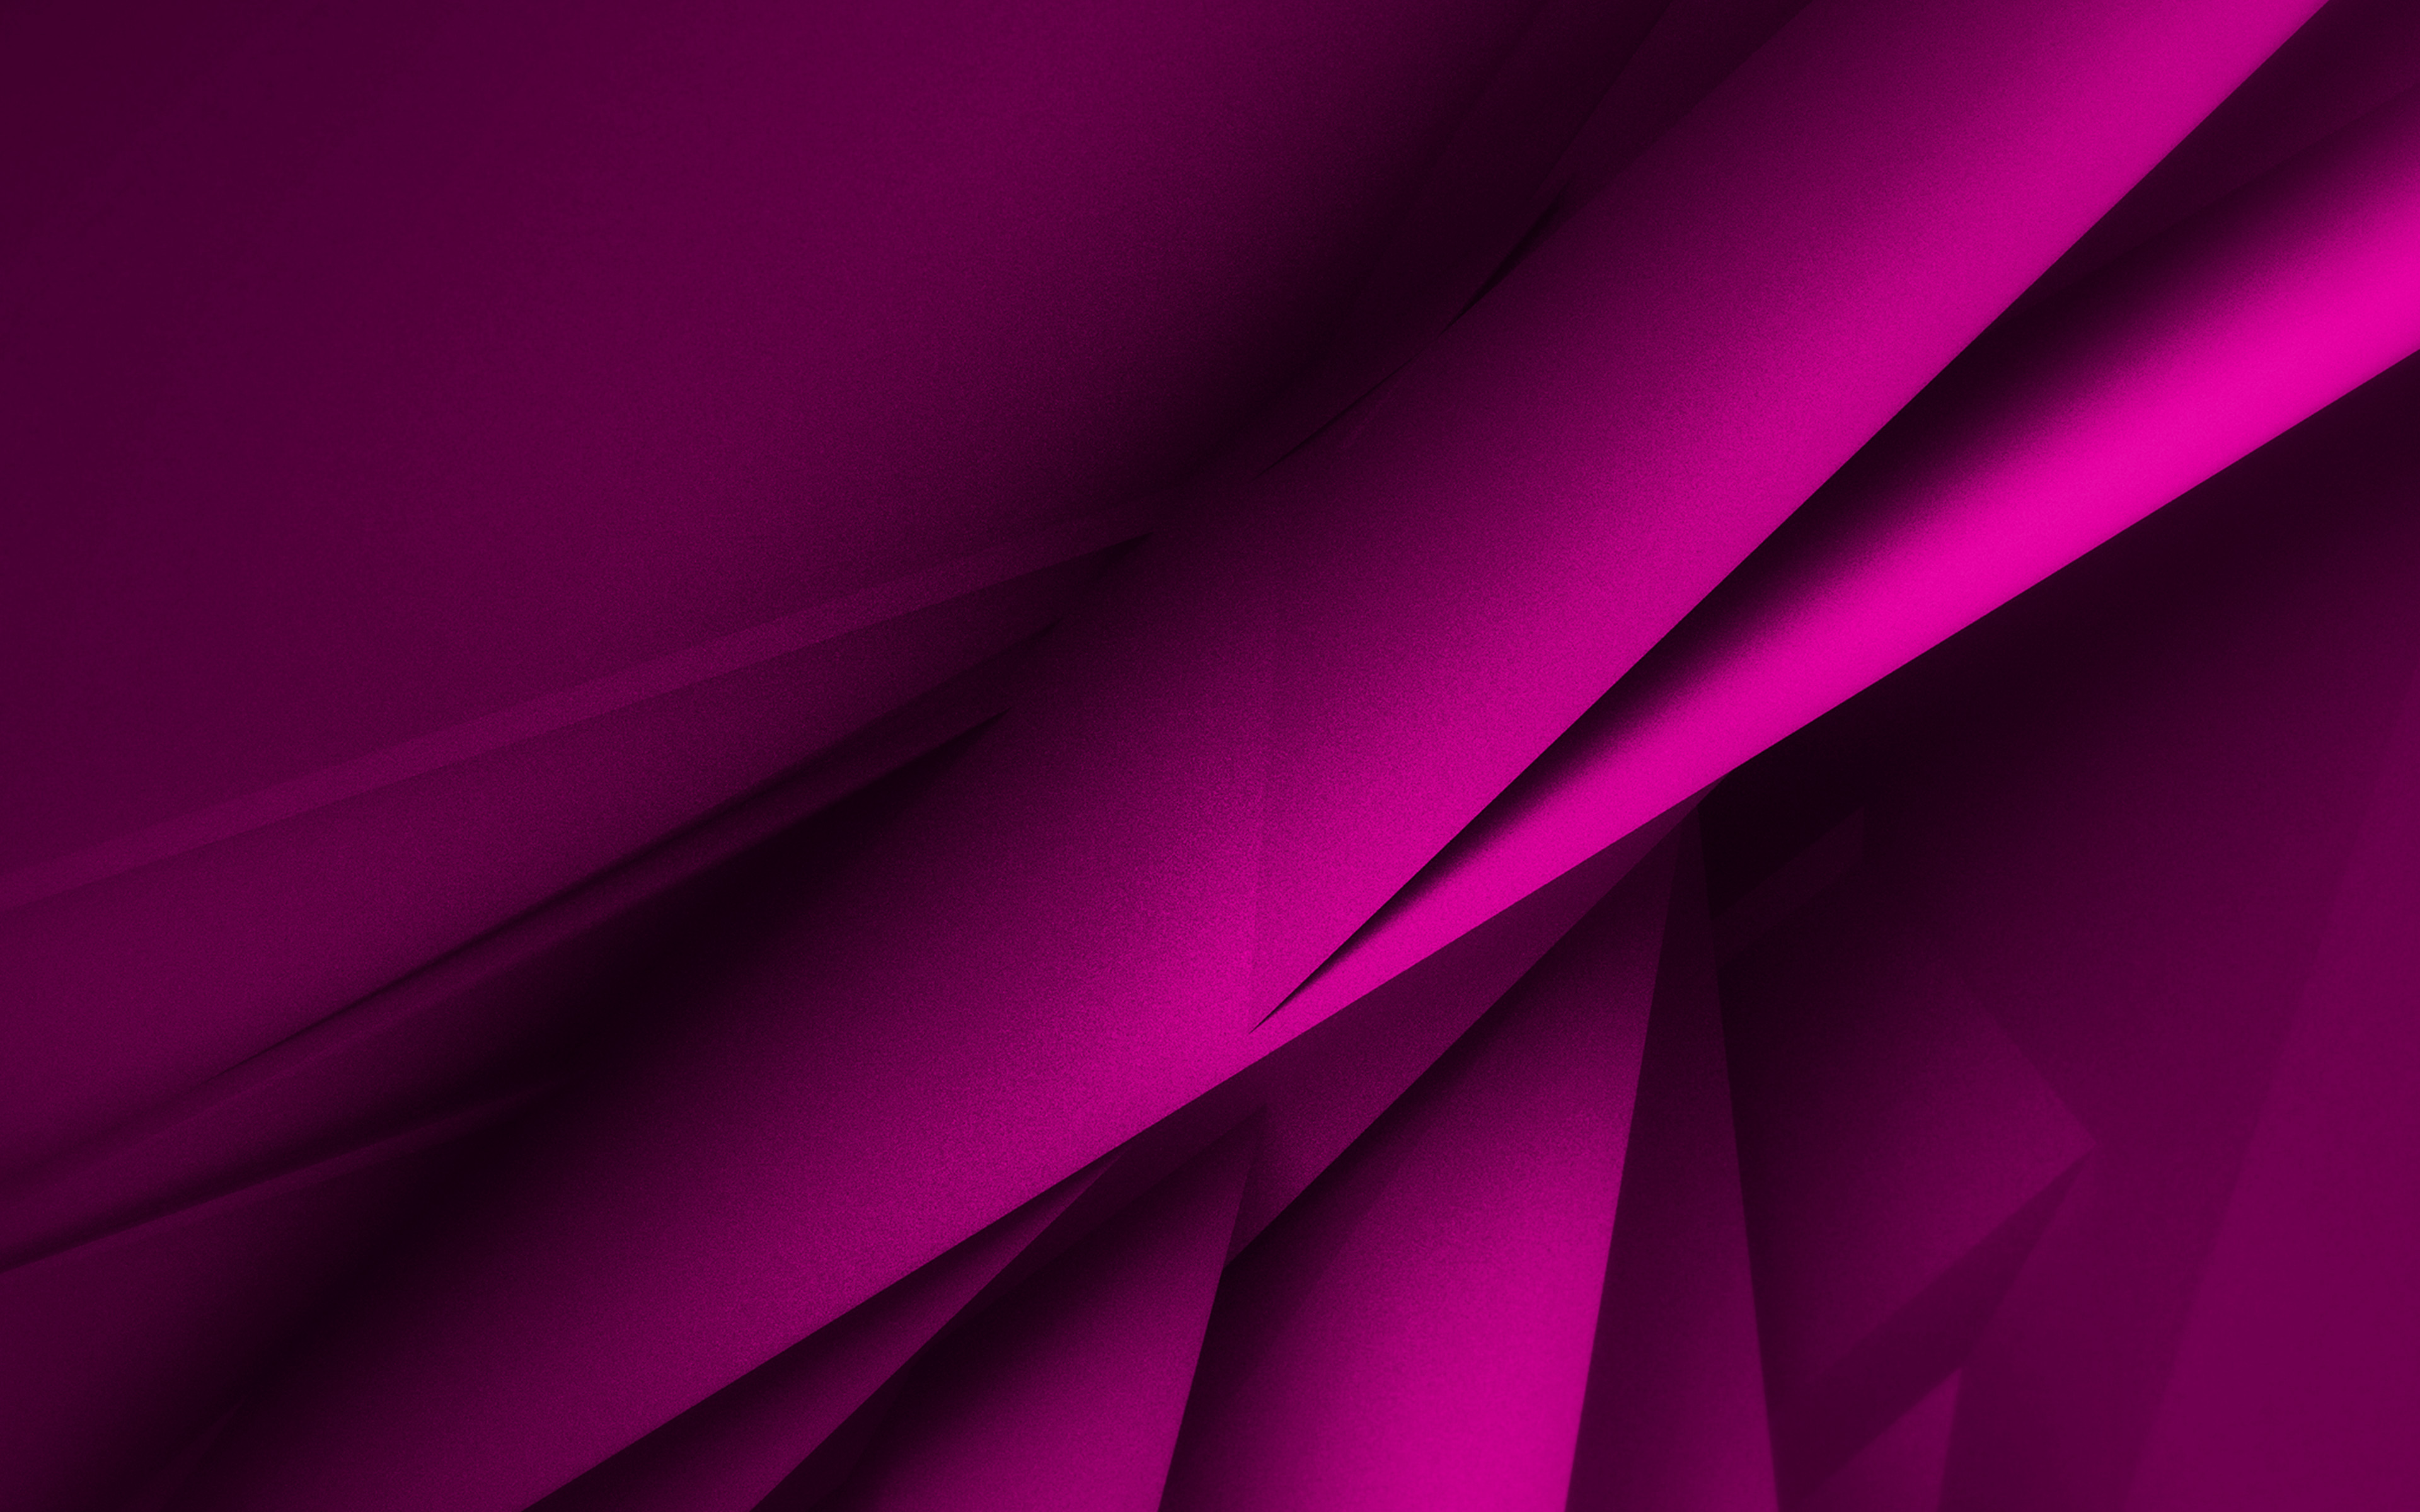 Download wallpaper purple geometric shapes, 4K, 3D textures, geometric textures, purple background, 3D geometric background, purple abstract background for desktop with resolution 3840x2400. High Quality HD picture wallpaper